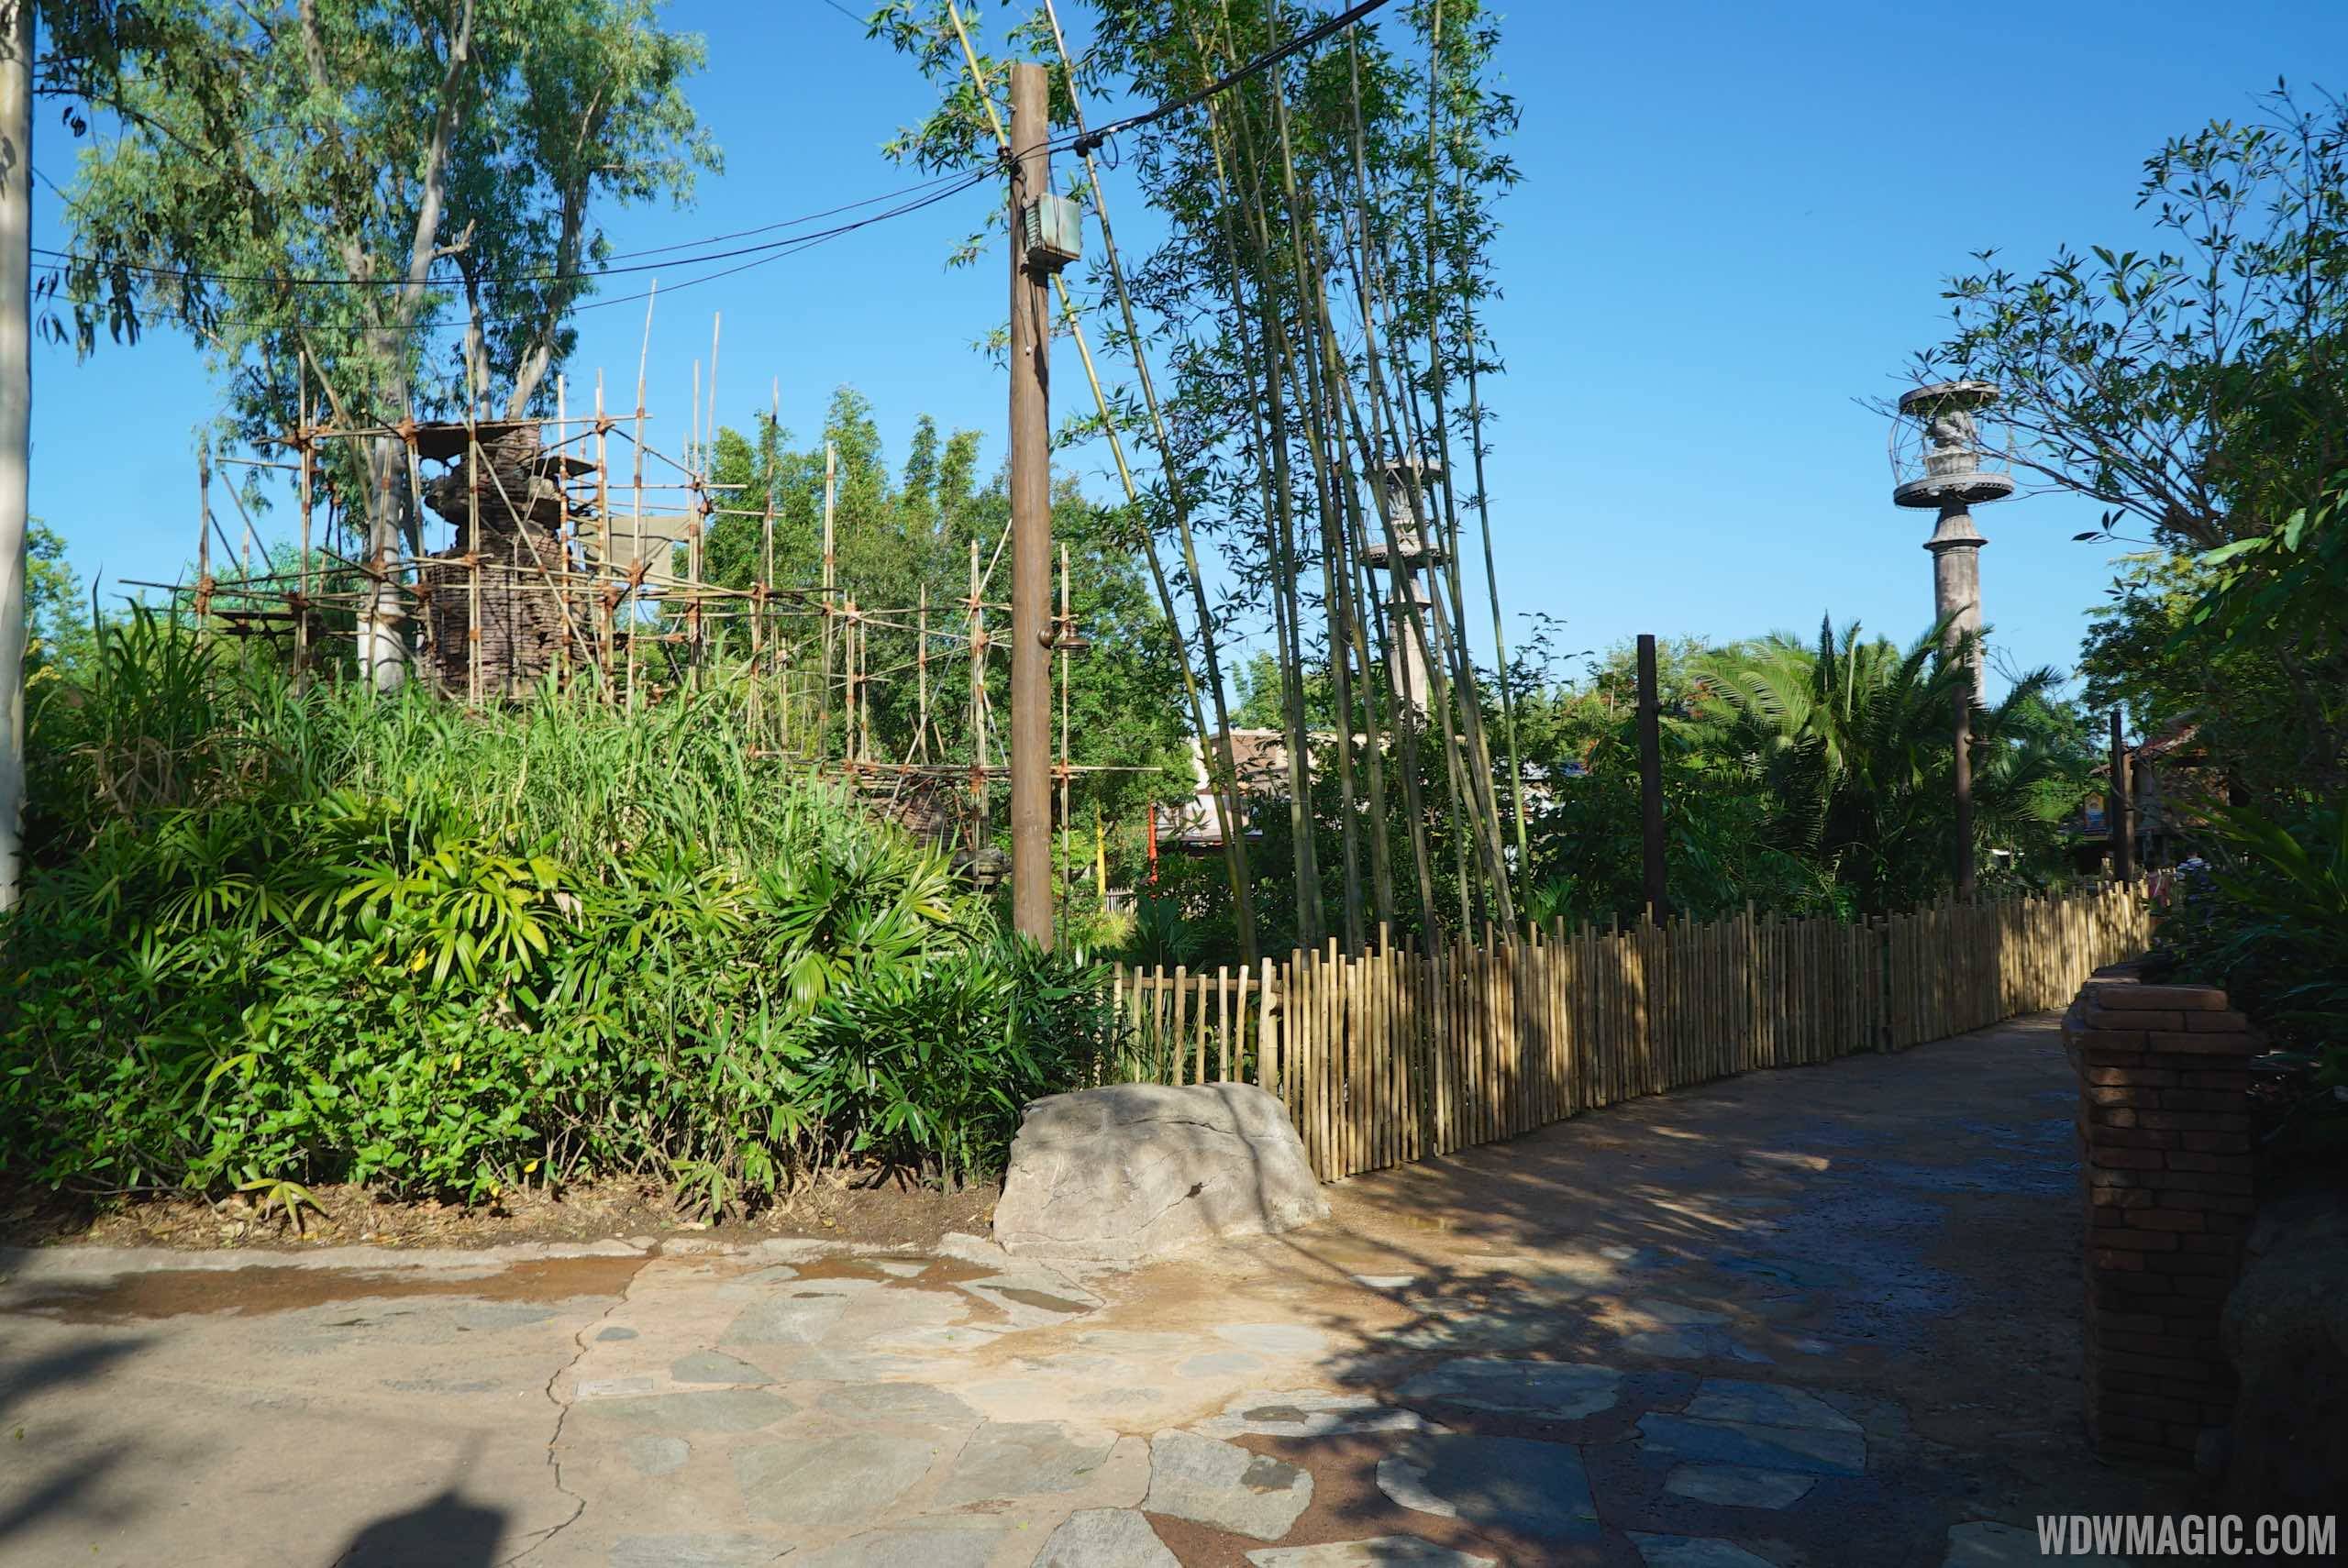 New Asia walkway - View from Everest side